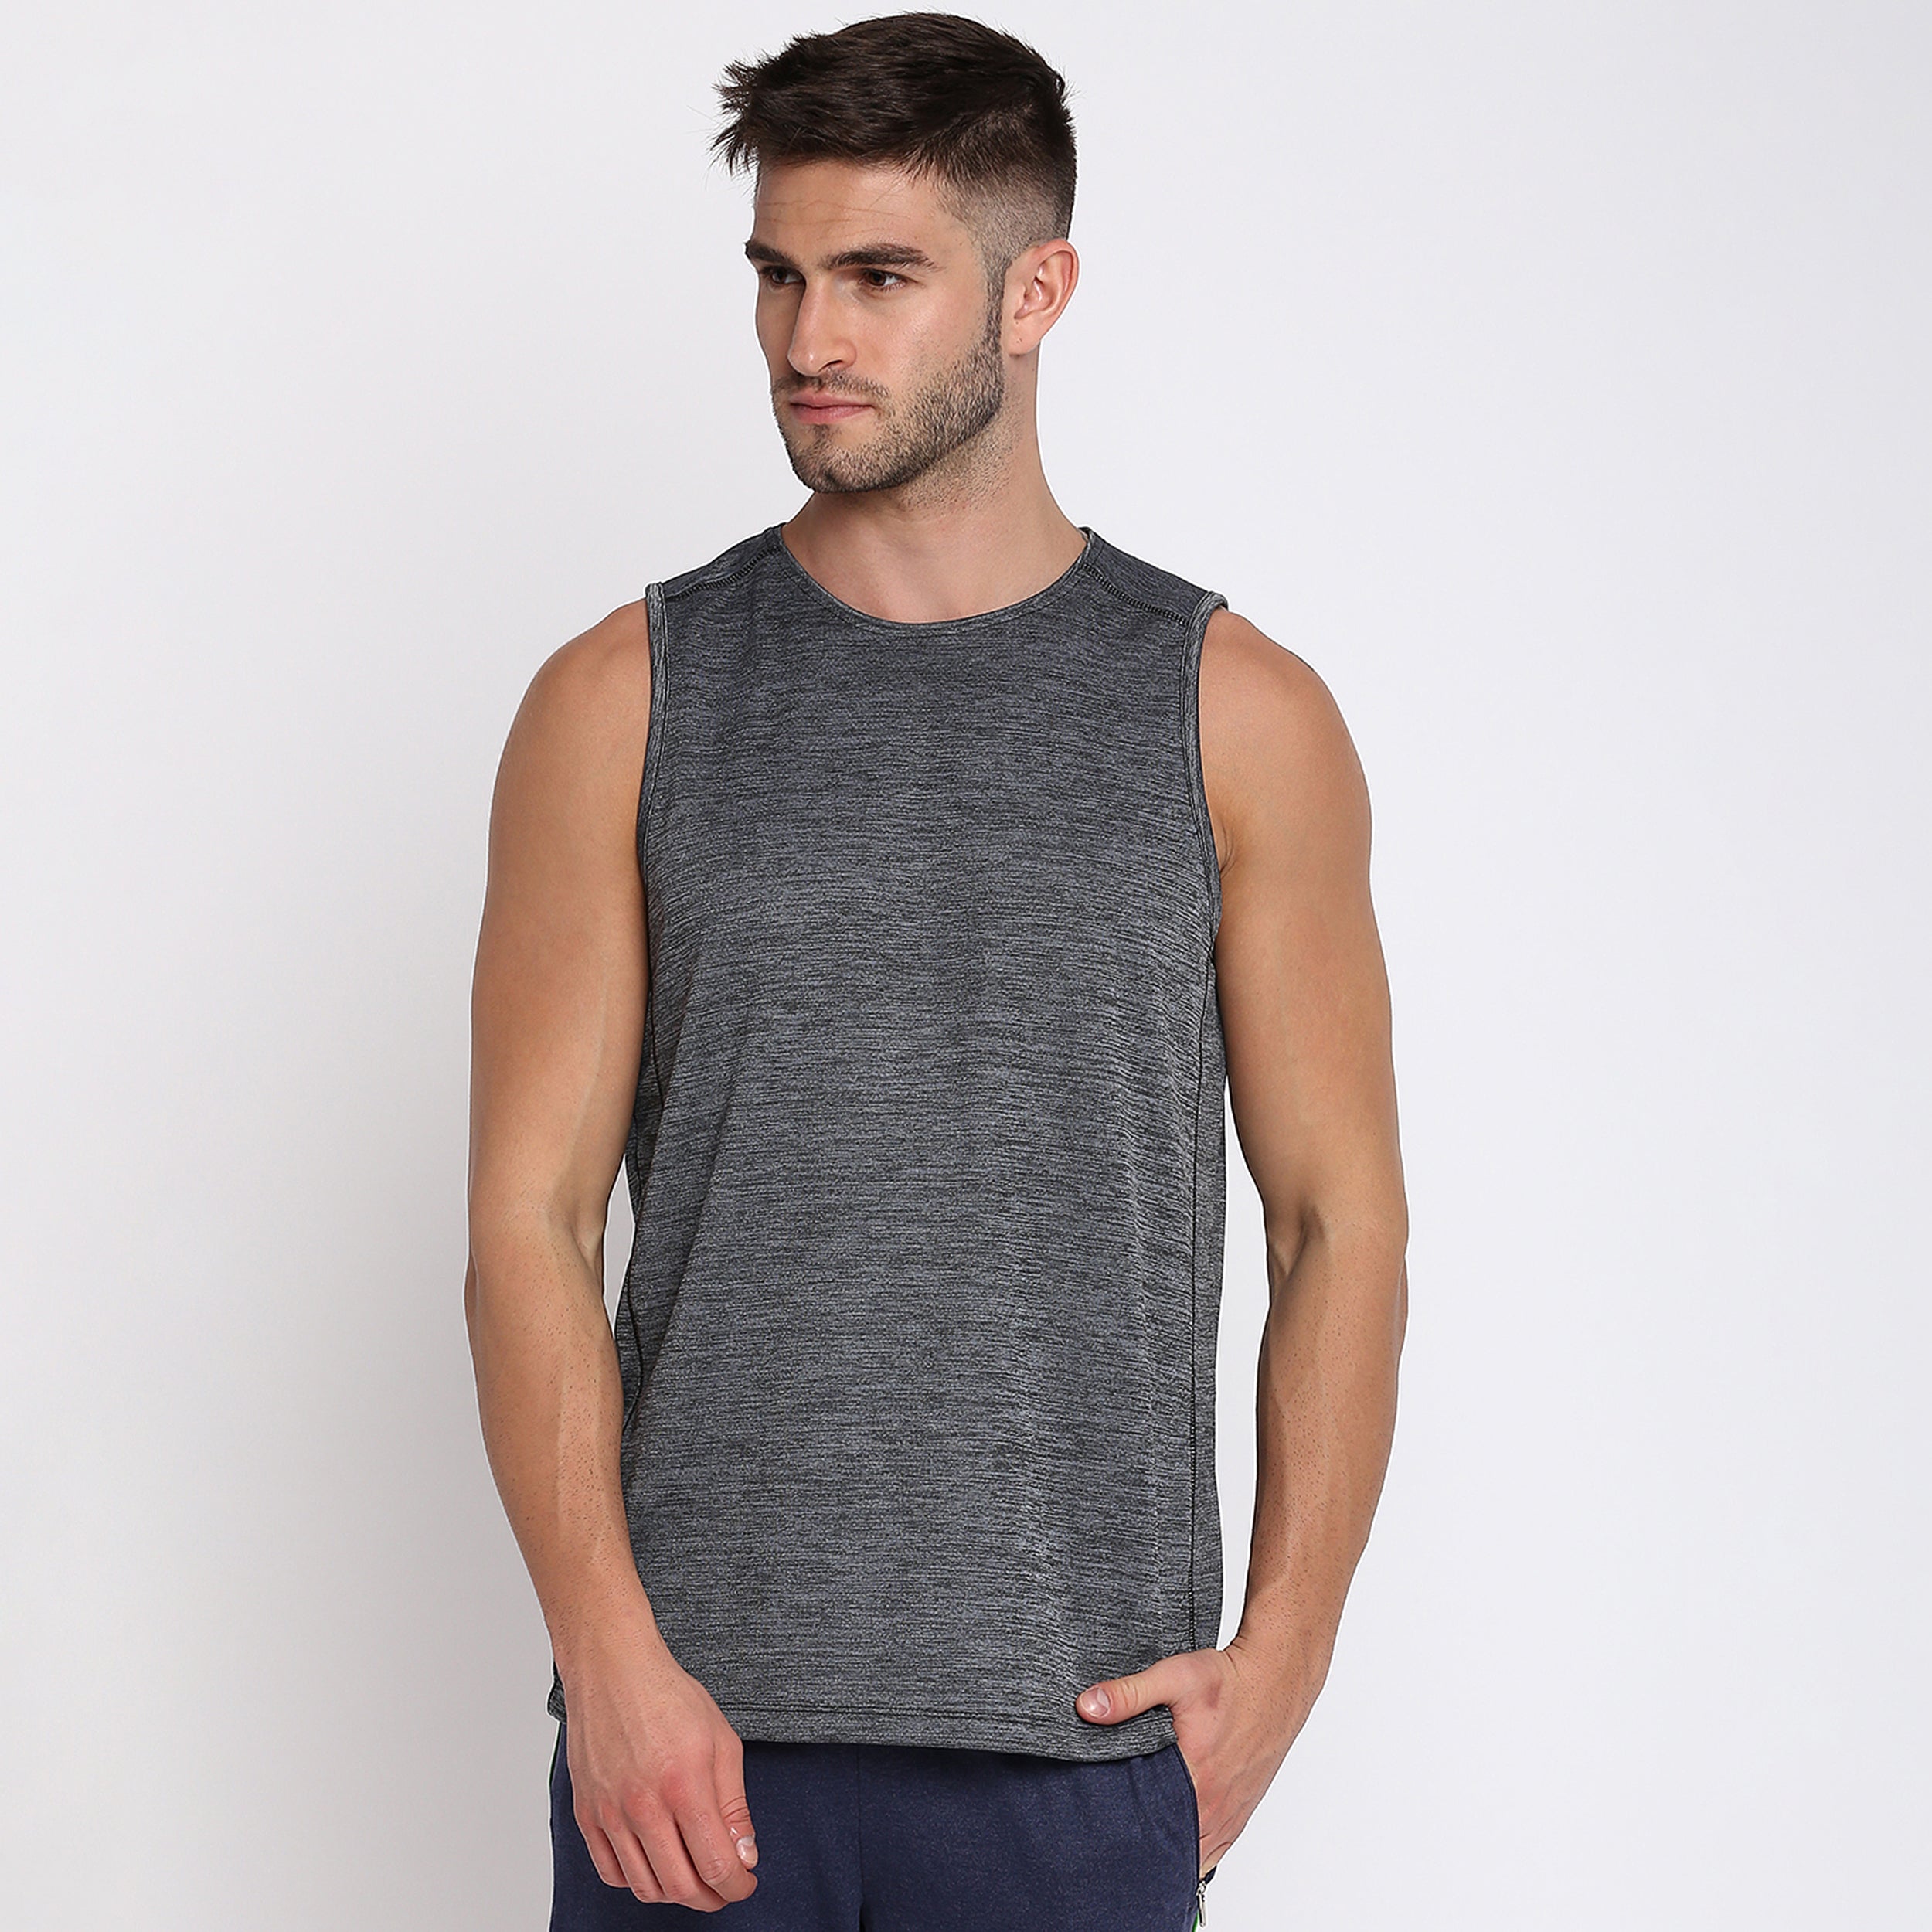 Poomer Tank Top - Power Vest - Maroon Red – Poomer Clothing Company